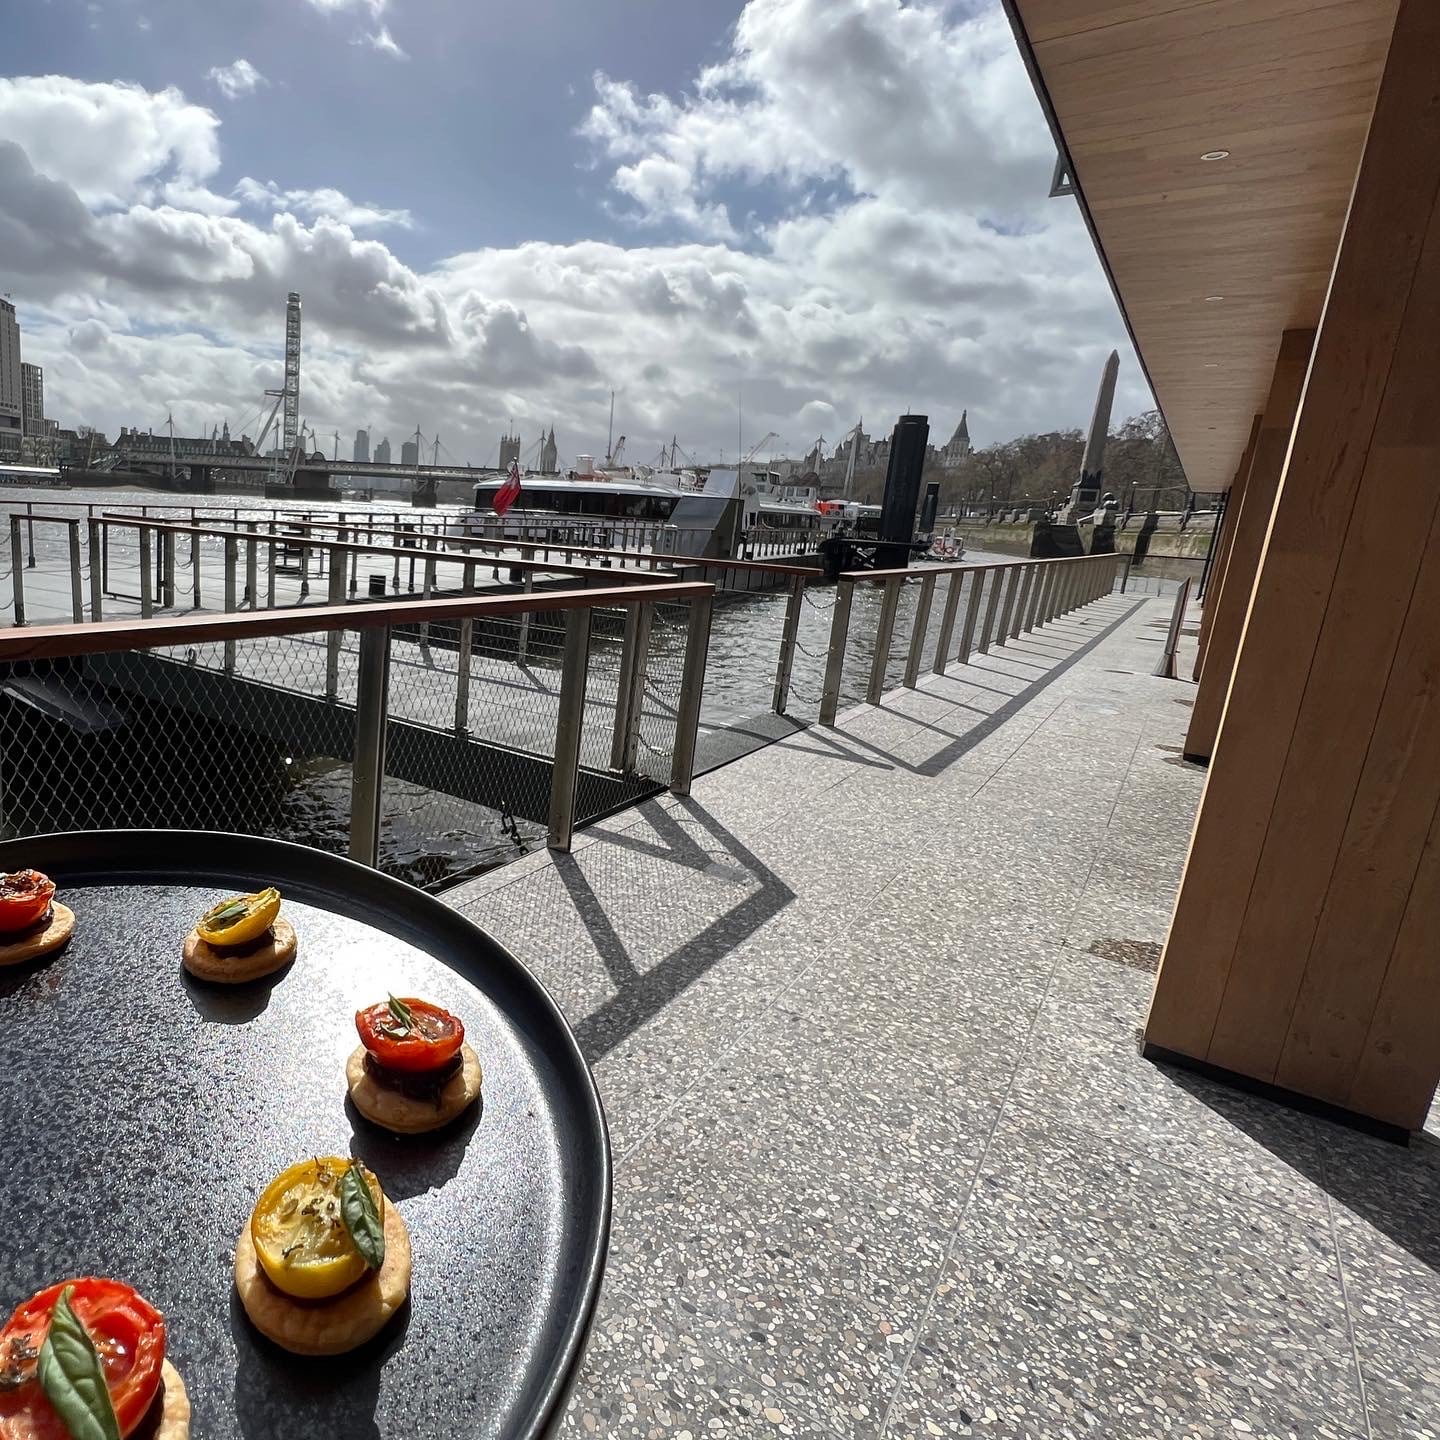 Canapes on River Thames - Woods Quay Pier